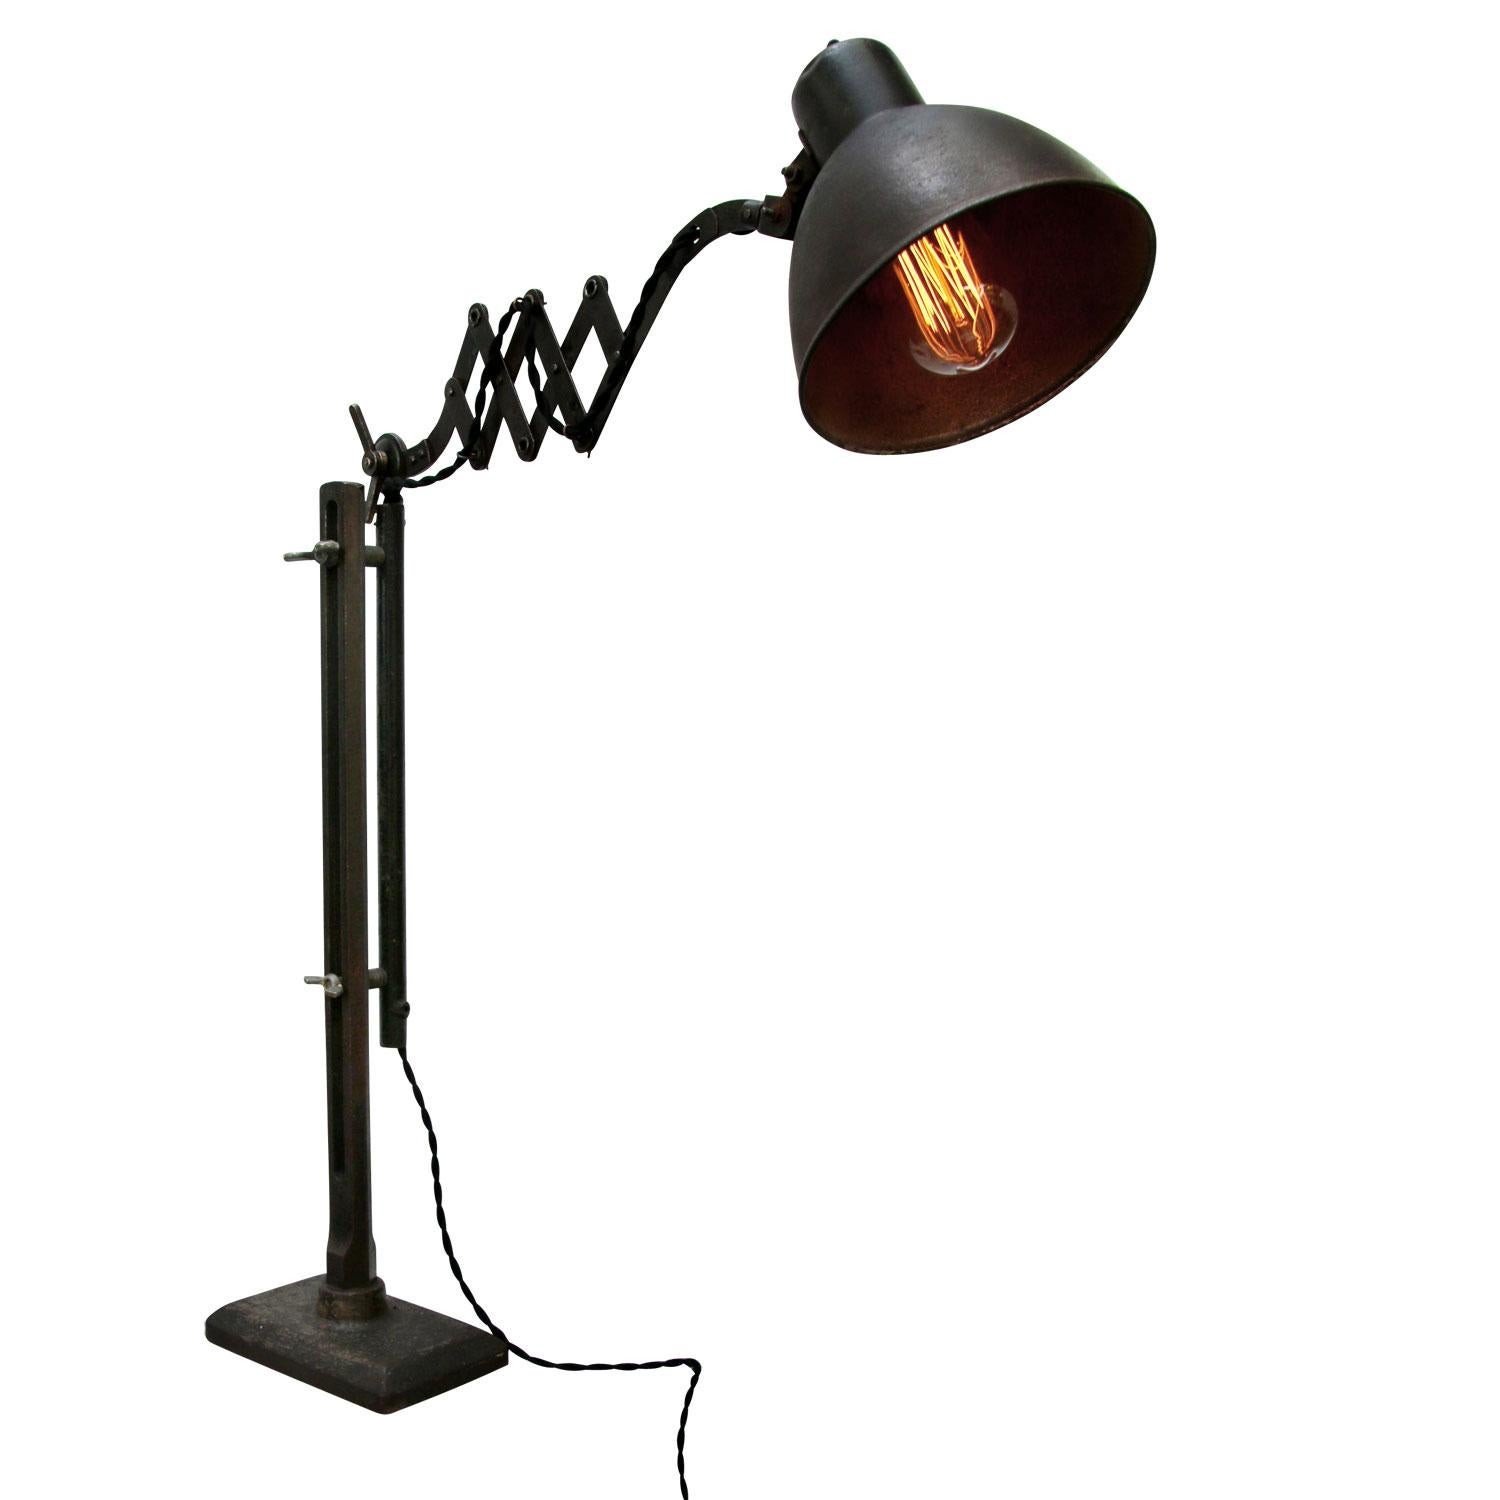 1920s black cast iron vintage industrial standing scissor work light.
adjustable in height, length and angle
including plug and switch

Weight: 7.00 kg / 15.4 lb

Priced per individual item. All lamps have been made suitable by international